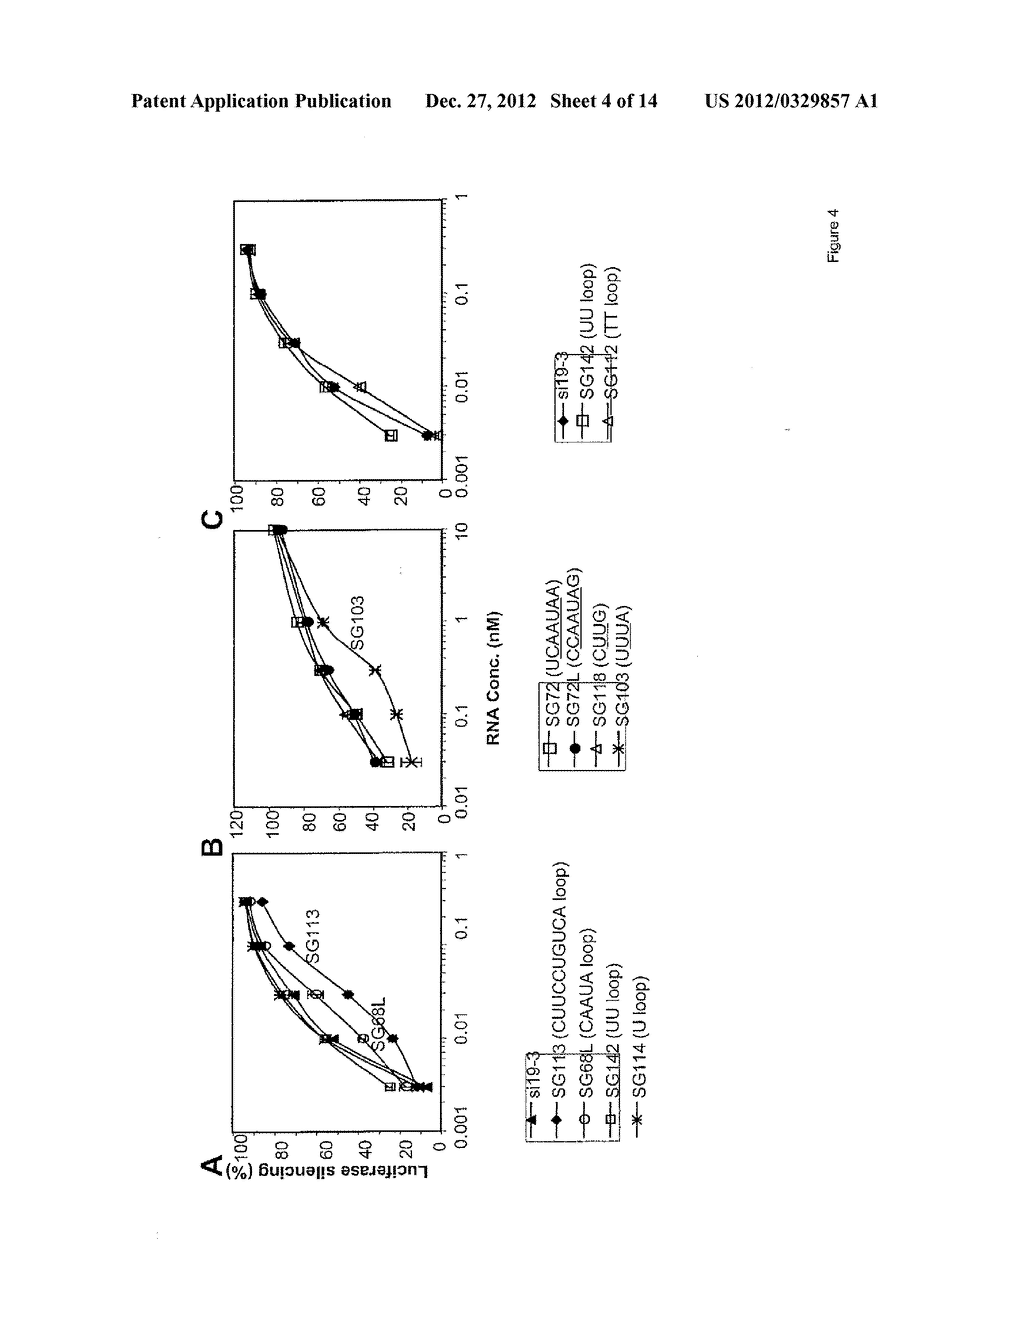 Short Hairpin RNAs for Inhibition of Gene Expression - diagram, schematic, and image 05